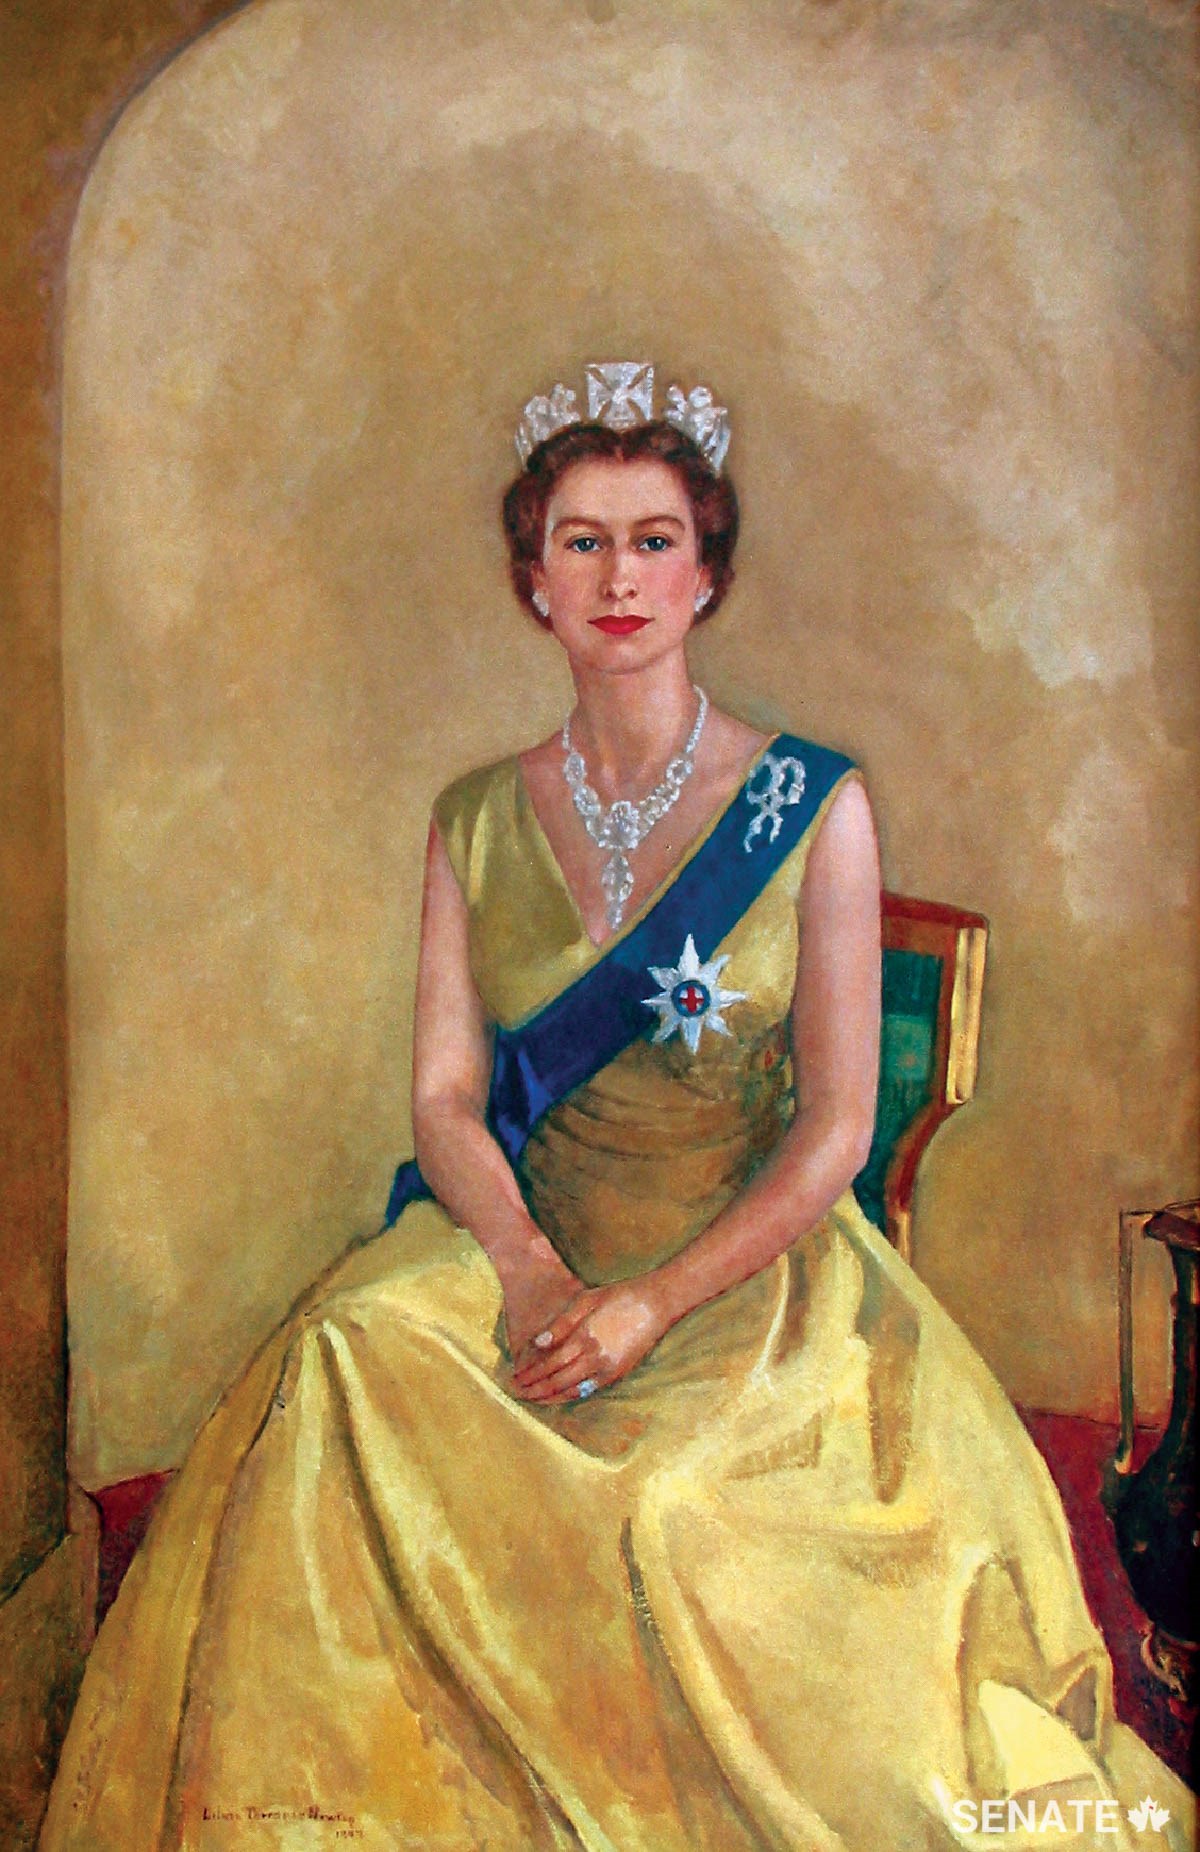 This 1957 portrait by Lilias Torrance Newton of the 31-year-old Queen Elizabeth II, painted five years after the beginning of her reign, is one of two original paintings in the foyer and the only one by a Canadian artist.